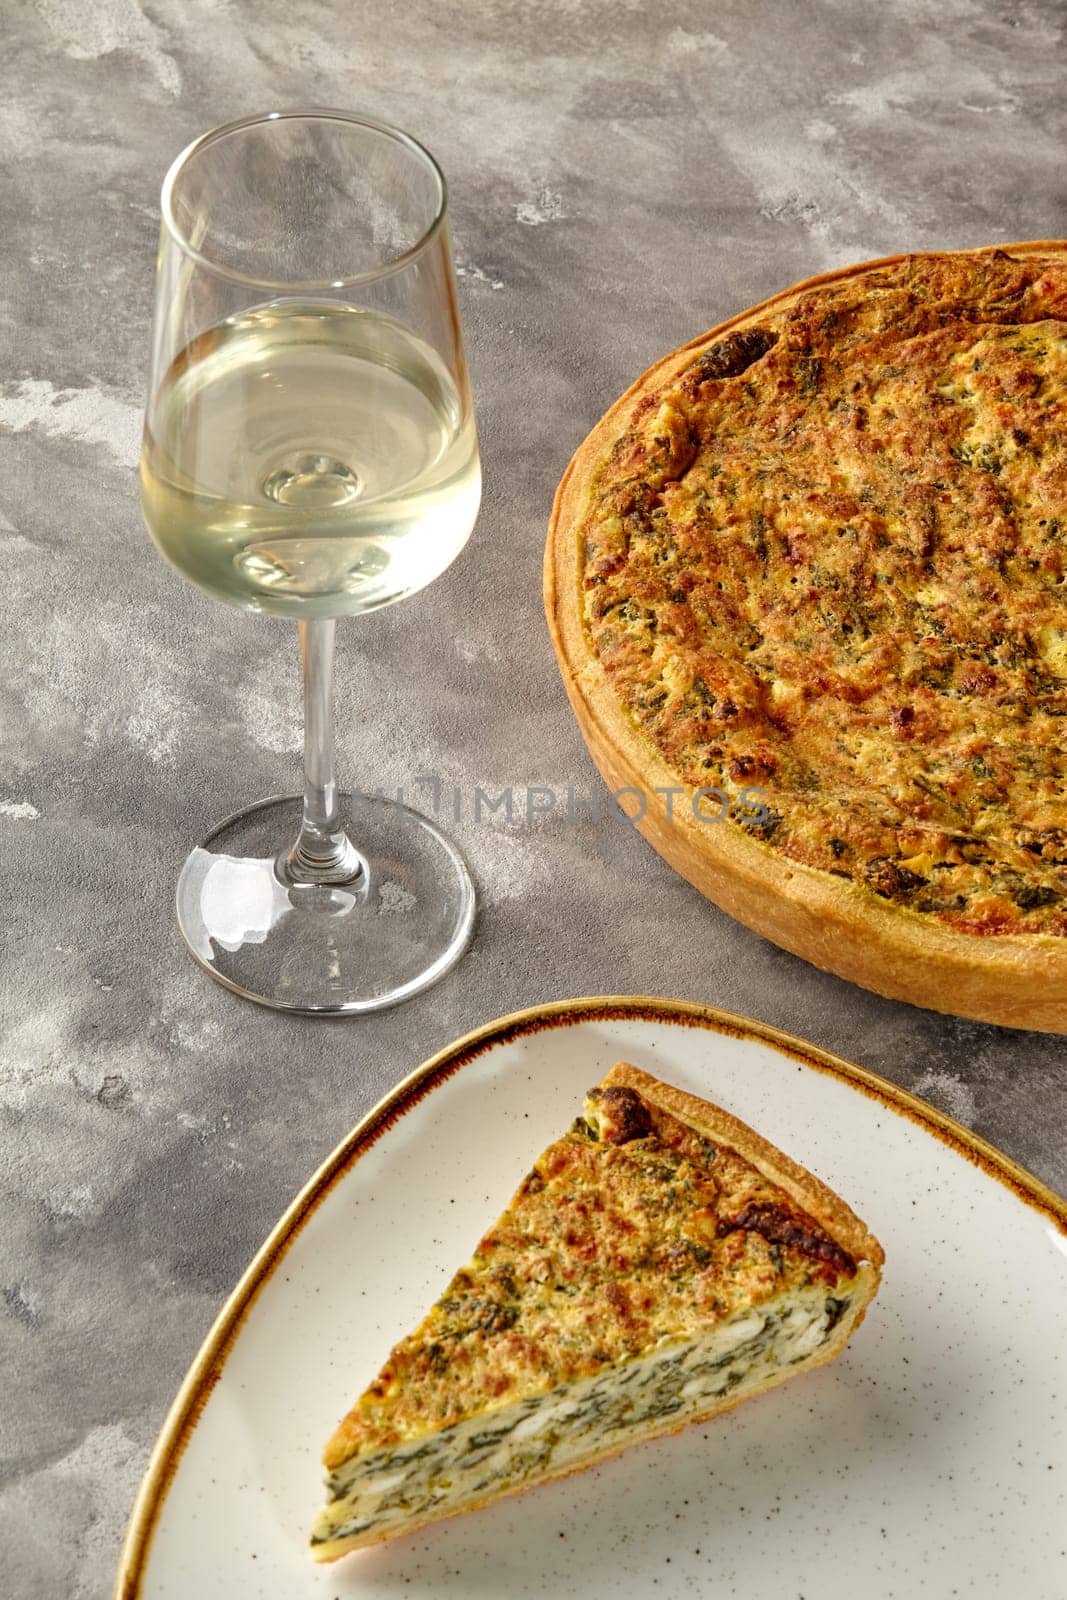 Savoring slice of Quiche Lorraine with cheese and spinach accompanied by glass of chilled white wine, presented on textured background